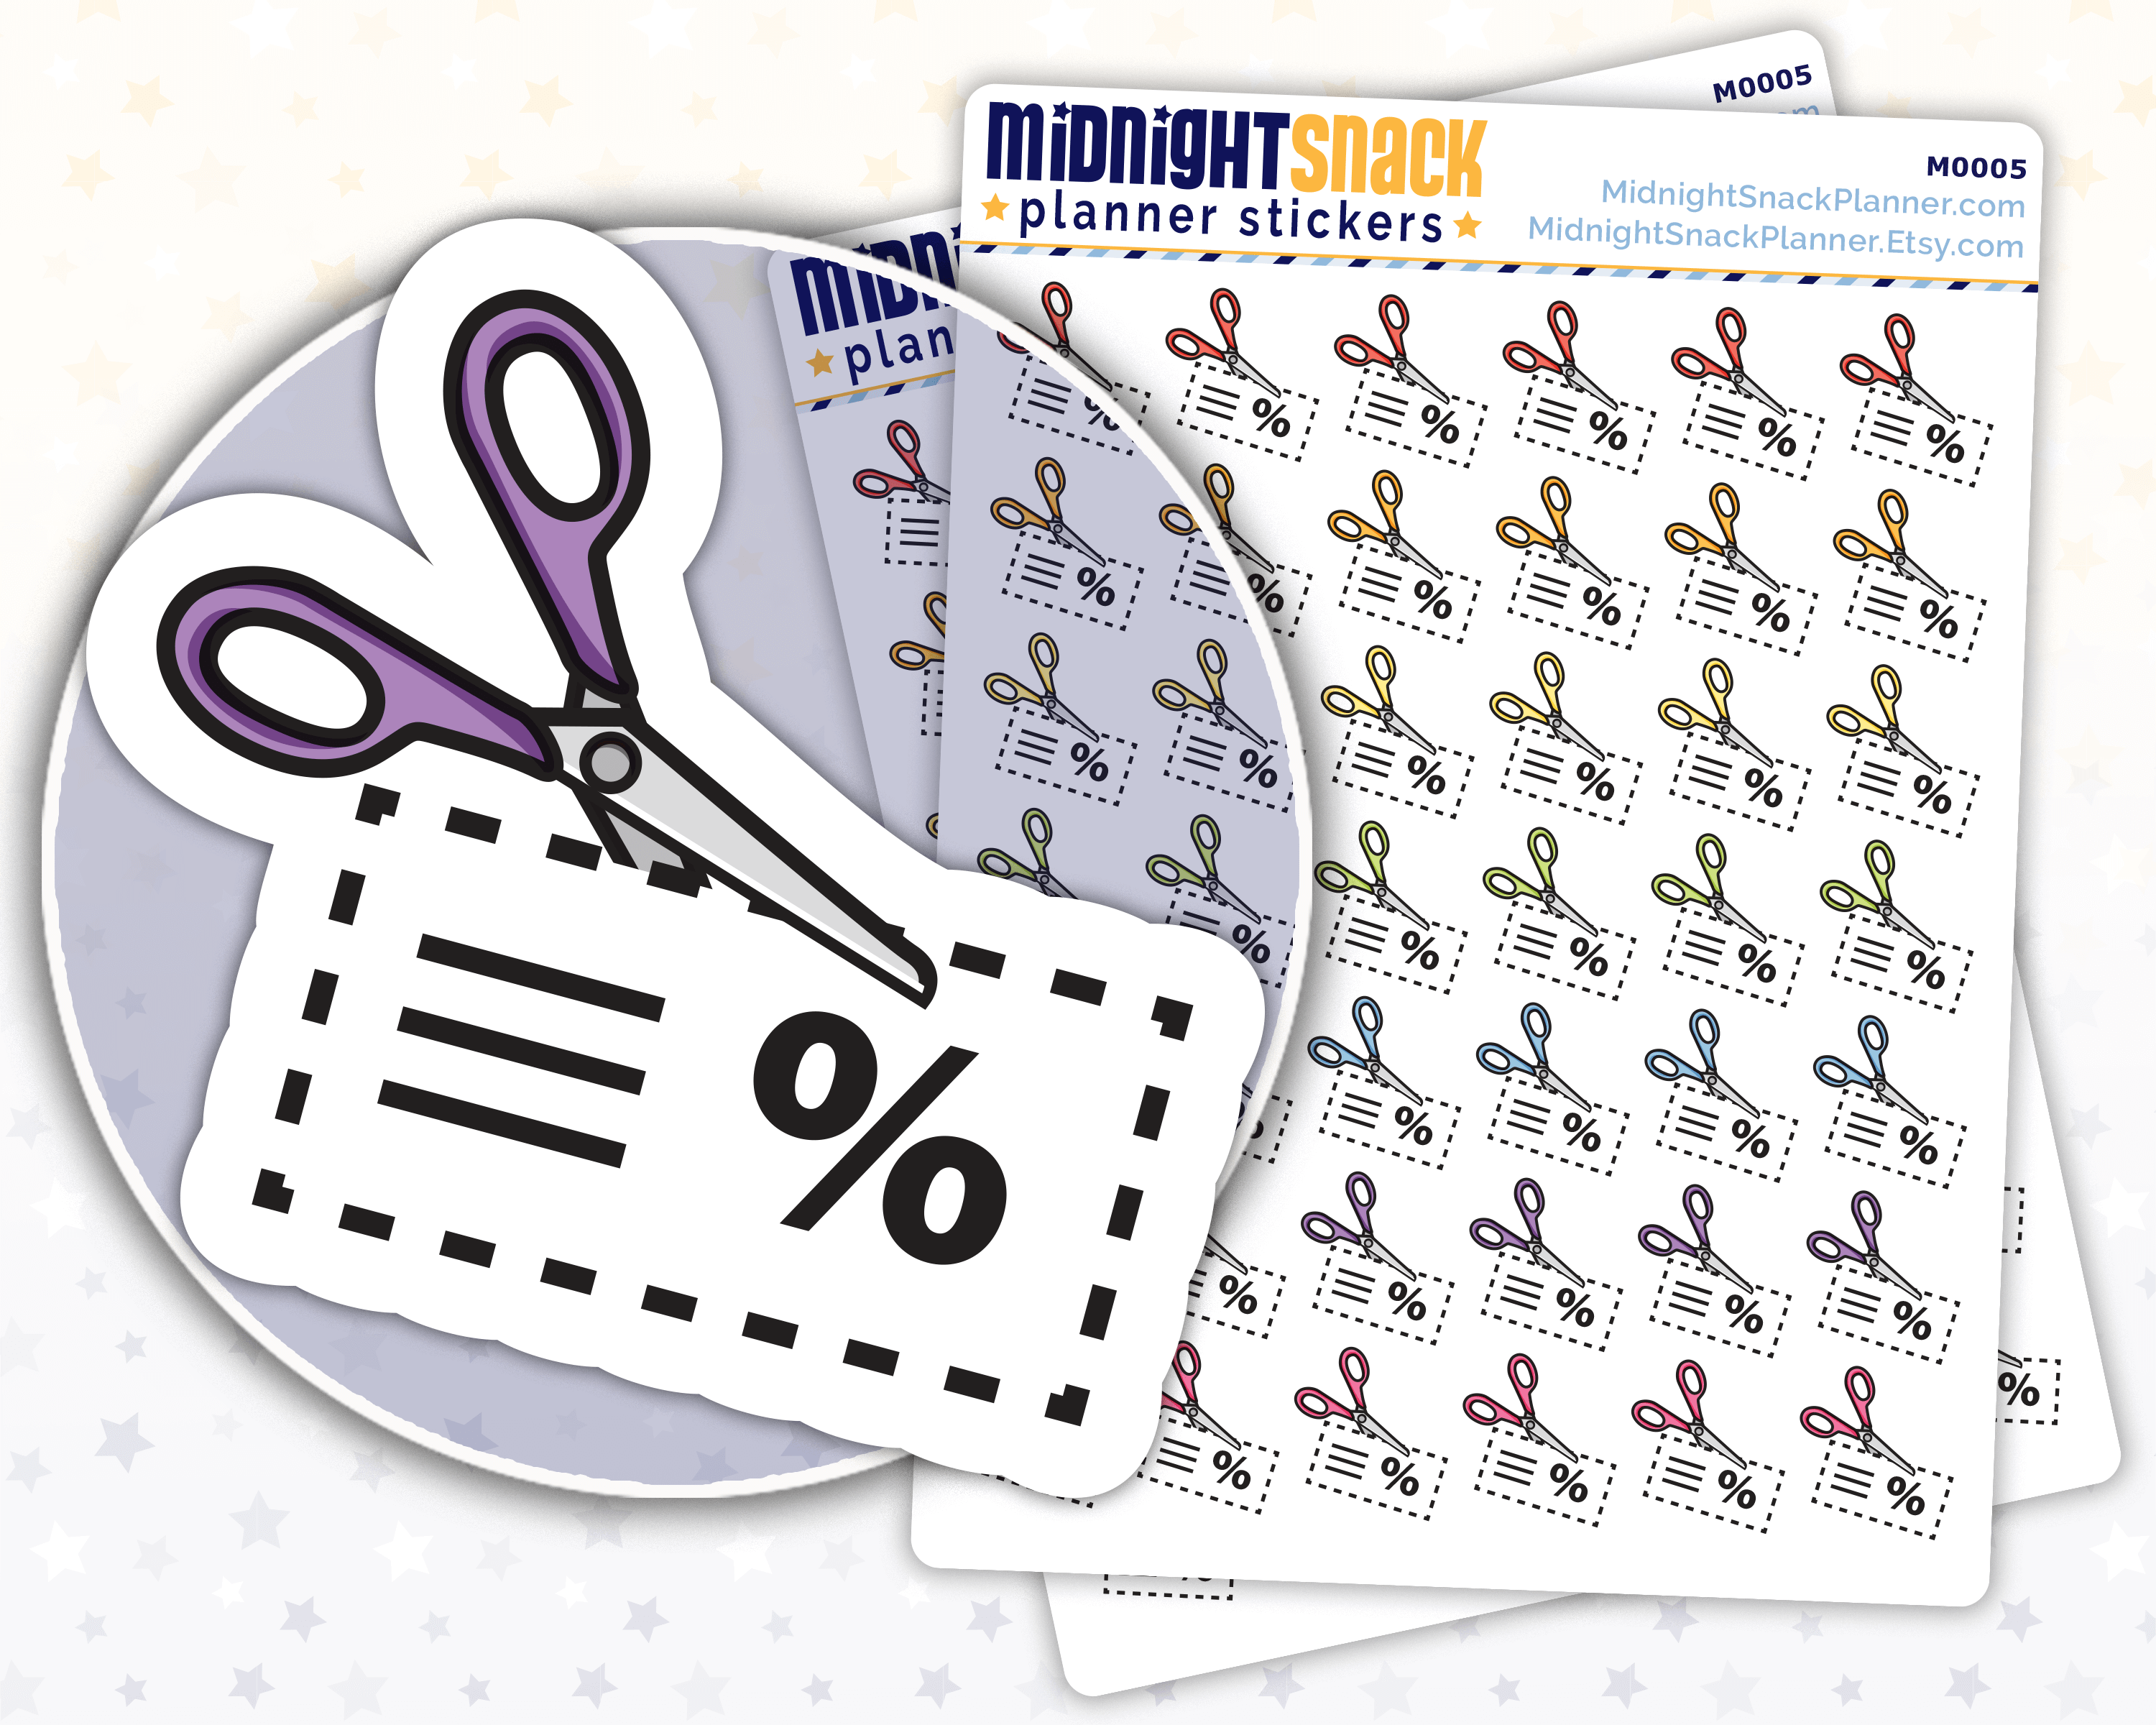 Cut Coupons Icon: Budgeting Planner Stickers: Midnight Snack Planner